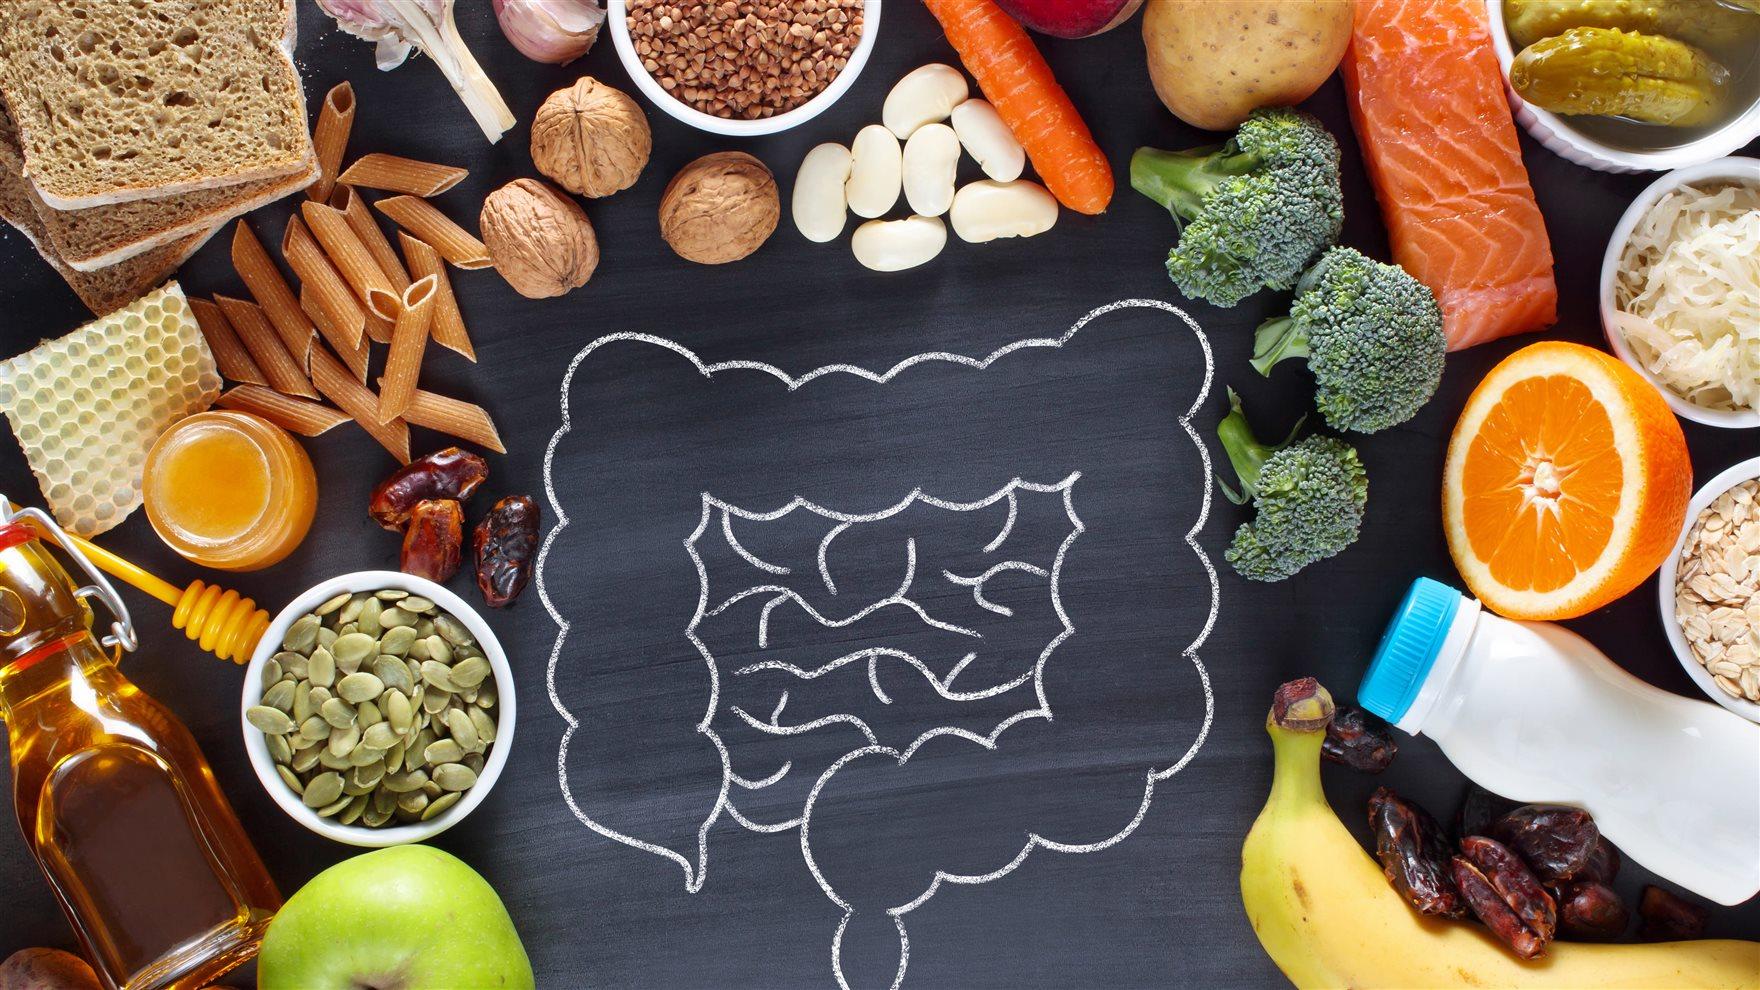 An image of a gut drawn on a chalboard and surrounded by food including nuts, broccoli, bananas, carrots and oranges.